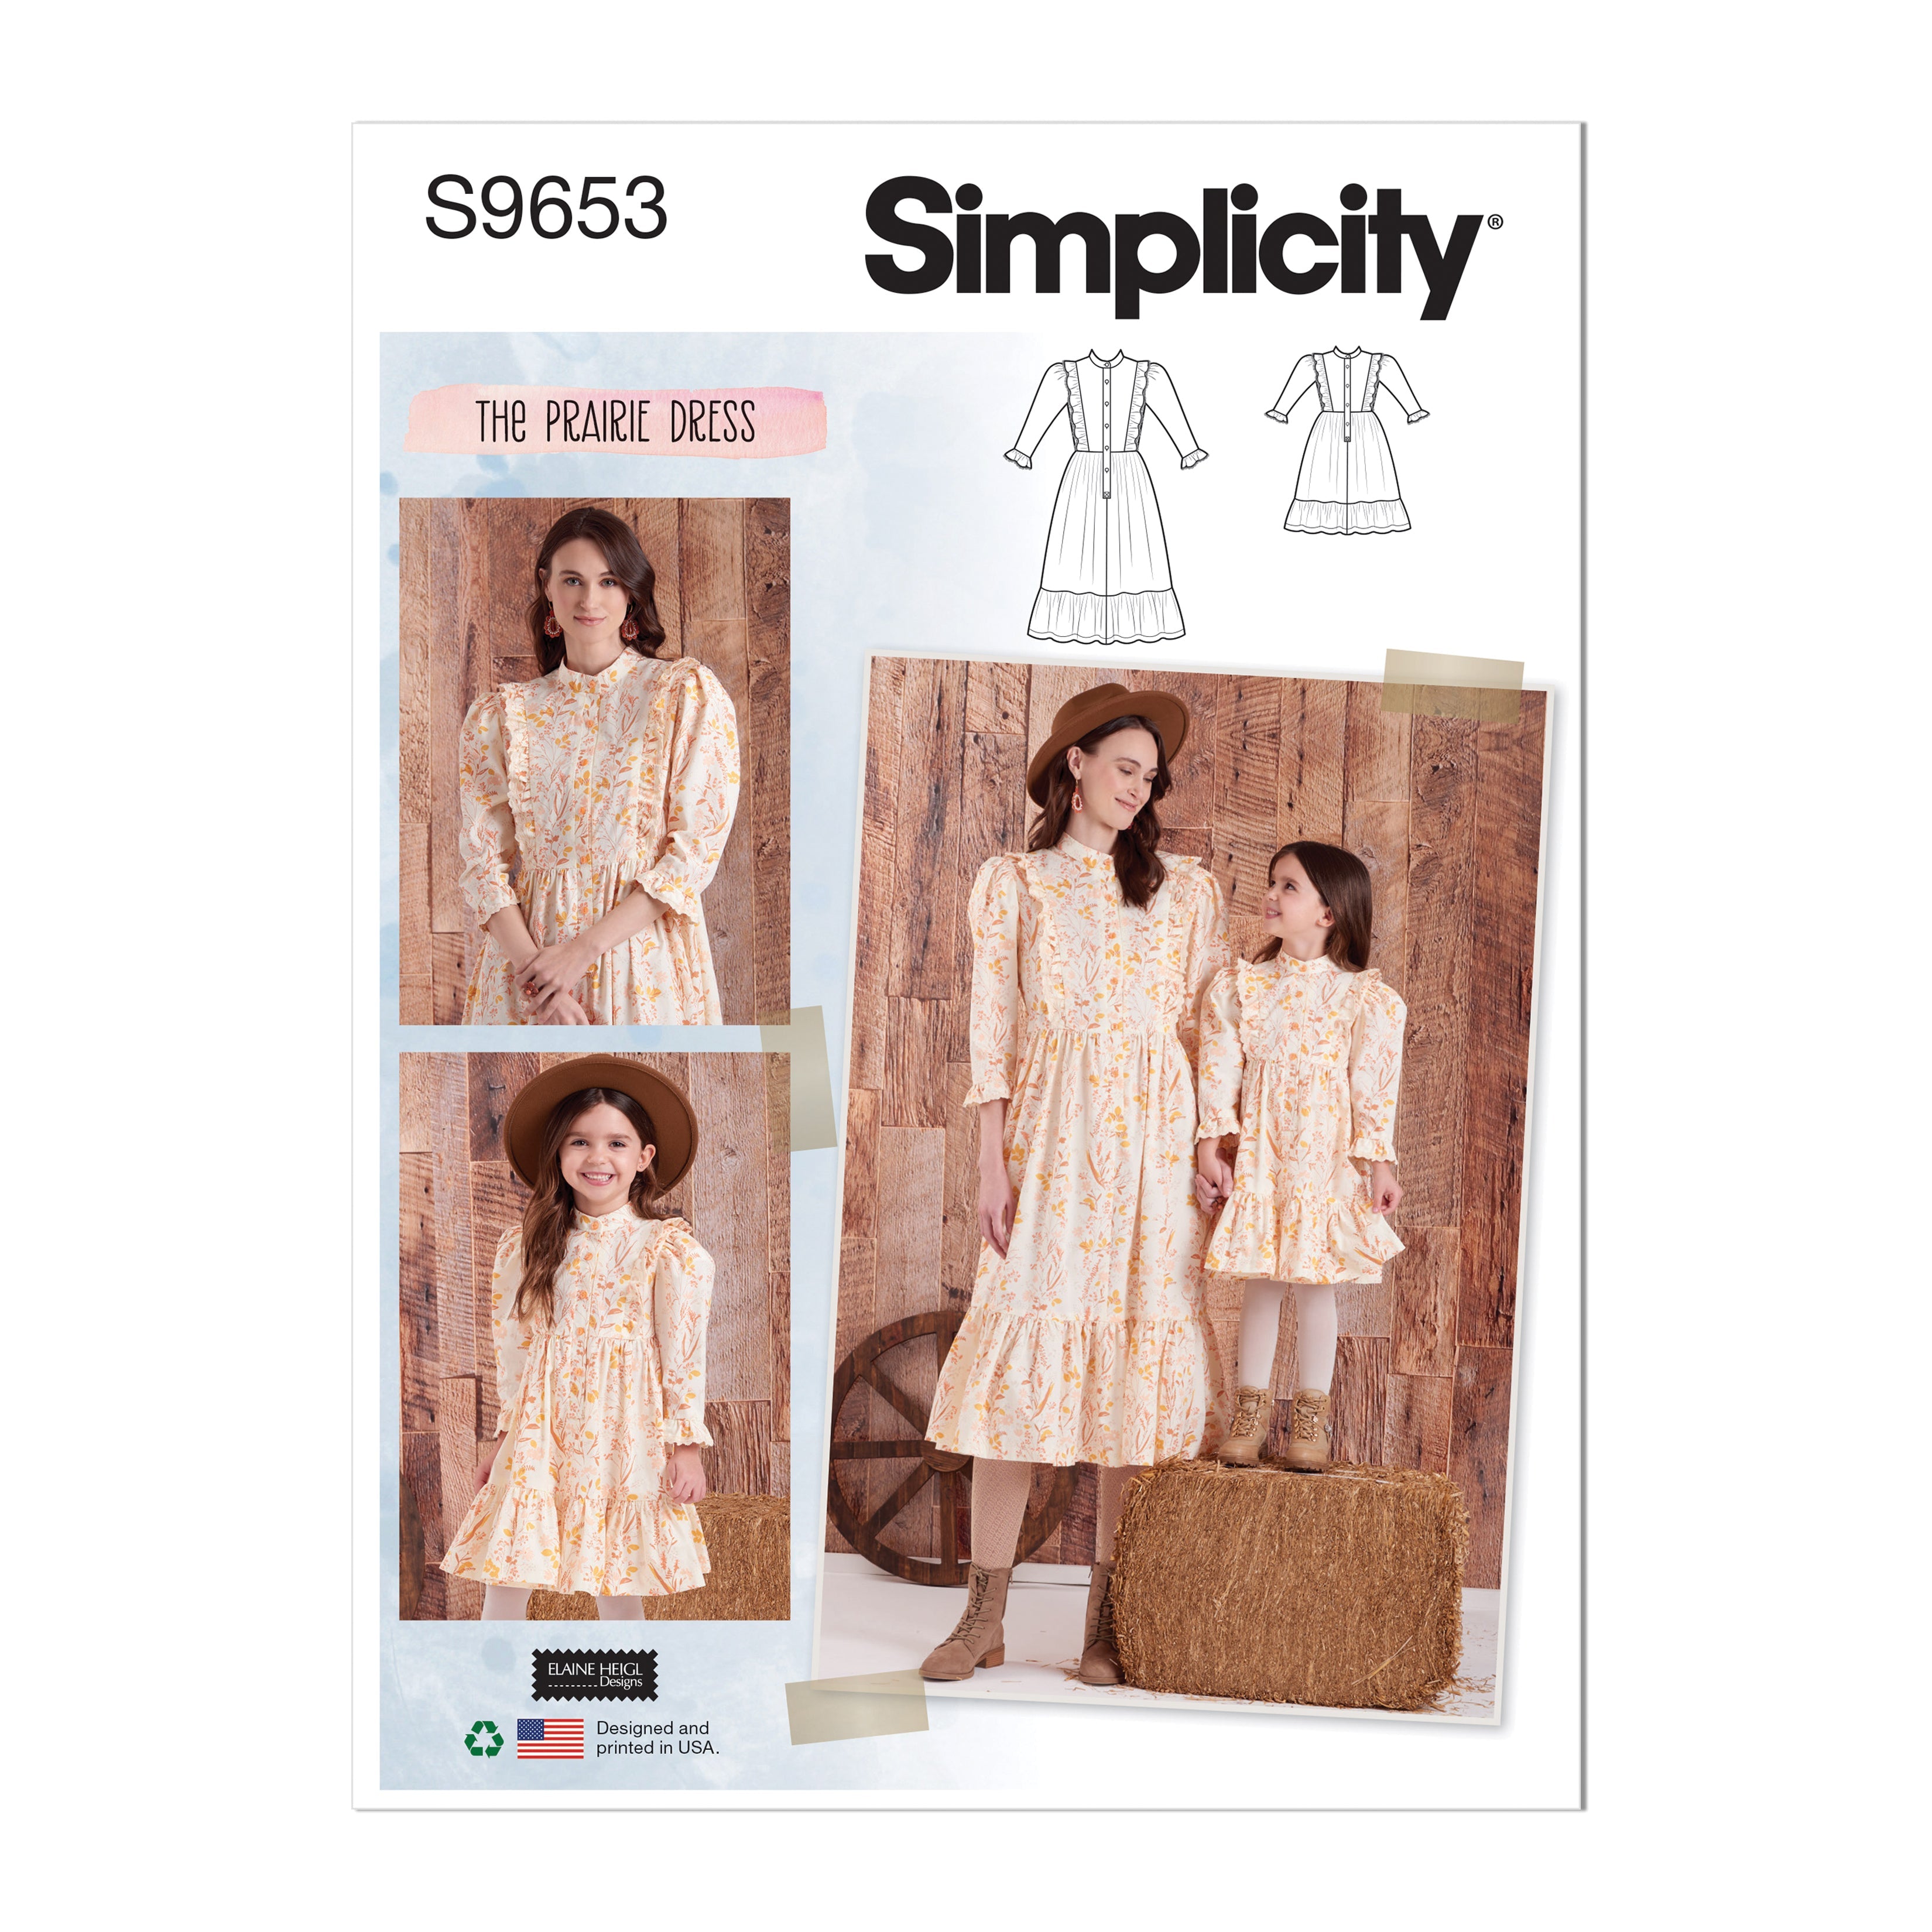 Simplicity 9653 Children's / Misses' Dress pattern by Elaine Heigl Designs from Jaycotts Sewing Supplies